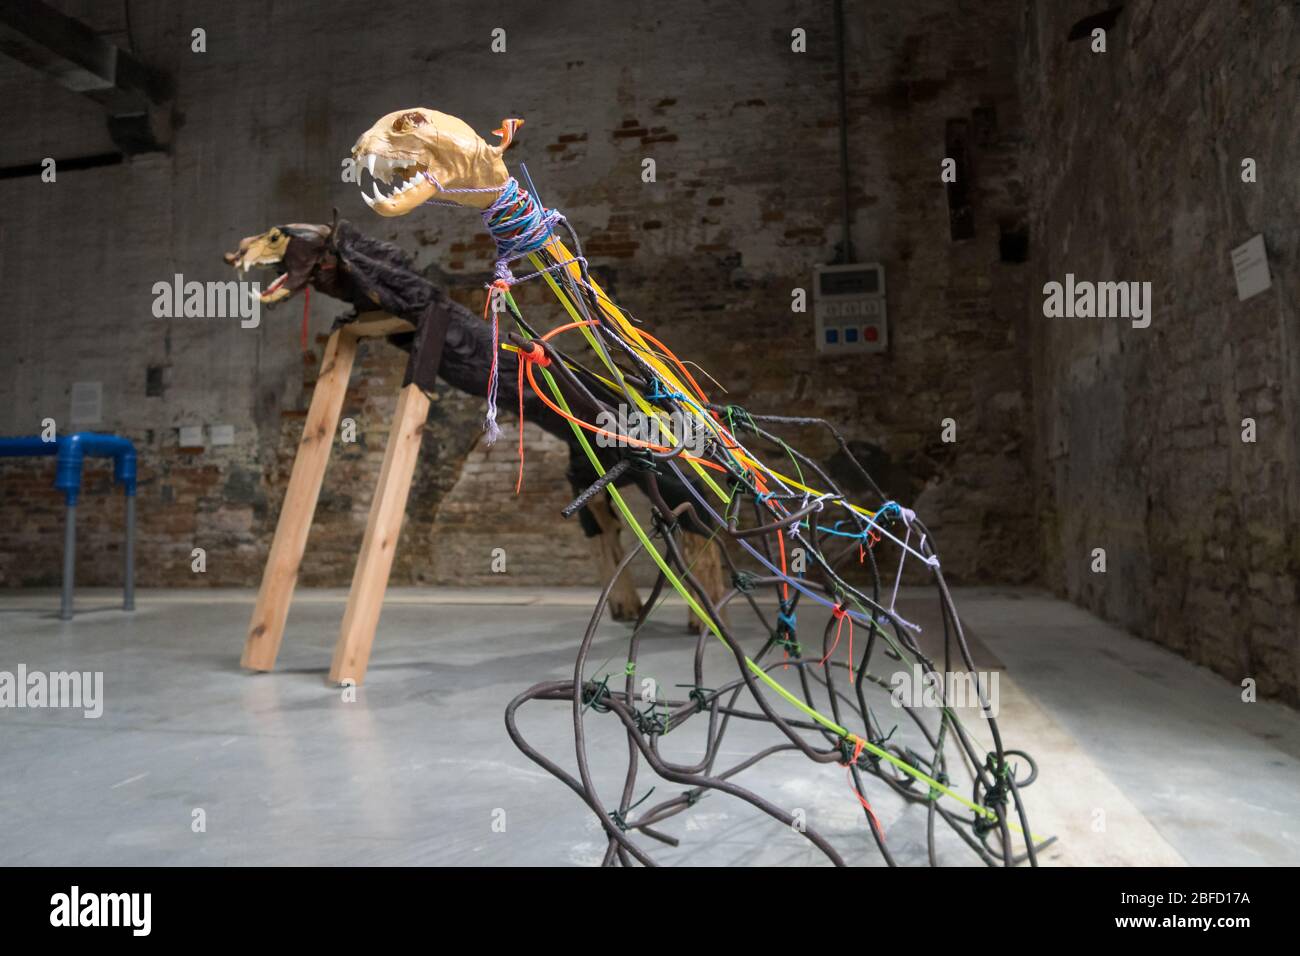 Sculptures by artist Jimmie Durham exposed at the Venice Biennale 2019 Stock Photo